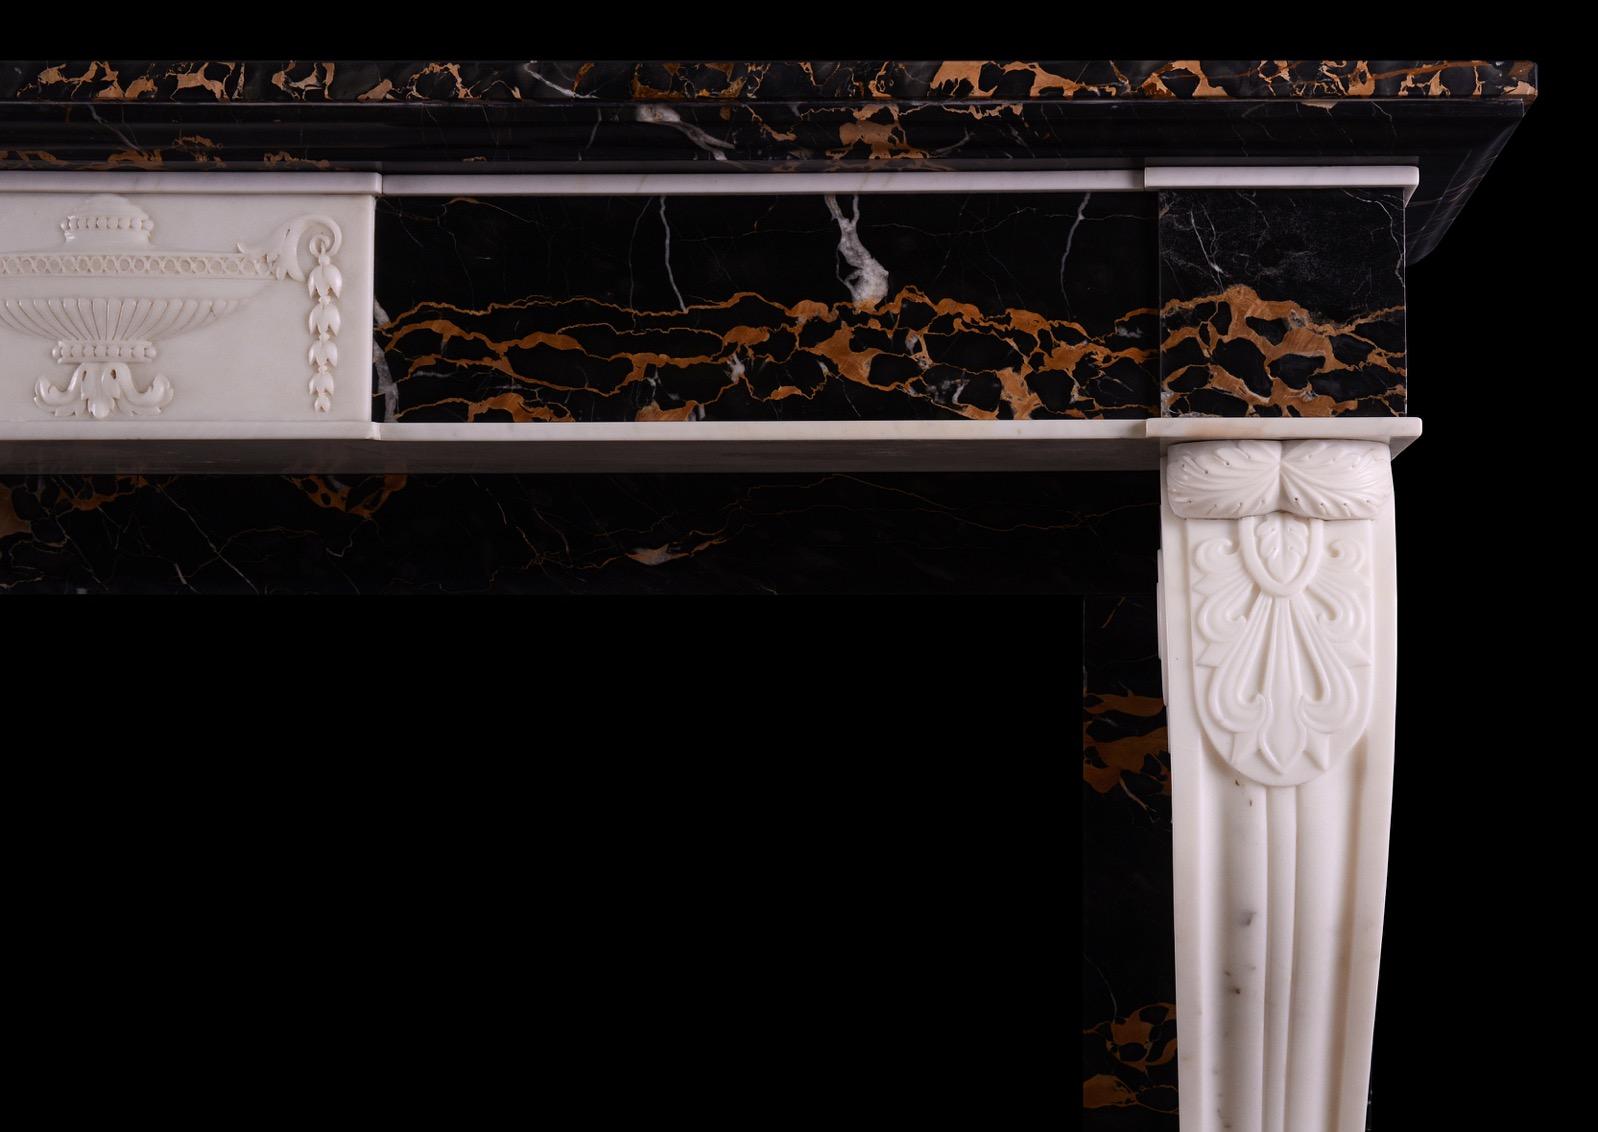 A high quality Italian Portoro and Statuary antique marble fireplace. The finely carved shaped fluted jambs with claw feet, scrollwork and foliage. The Portoro frieze with carved urn centre with guilloche and bellflower detailing. Portoro moulded